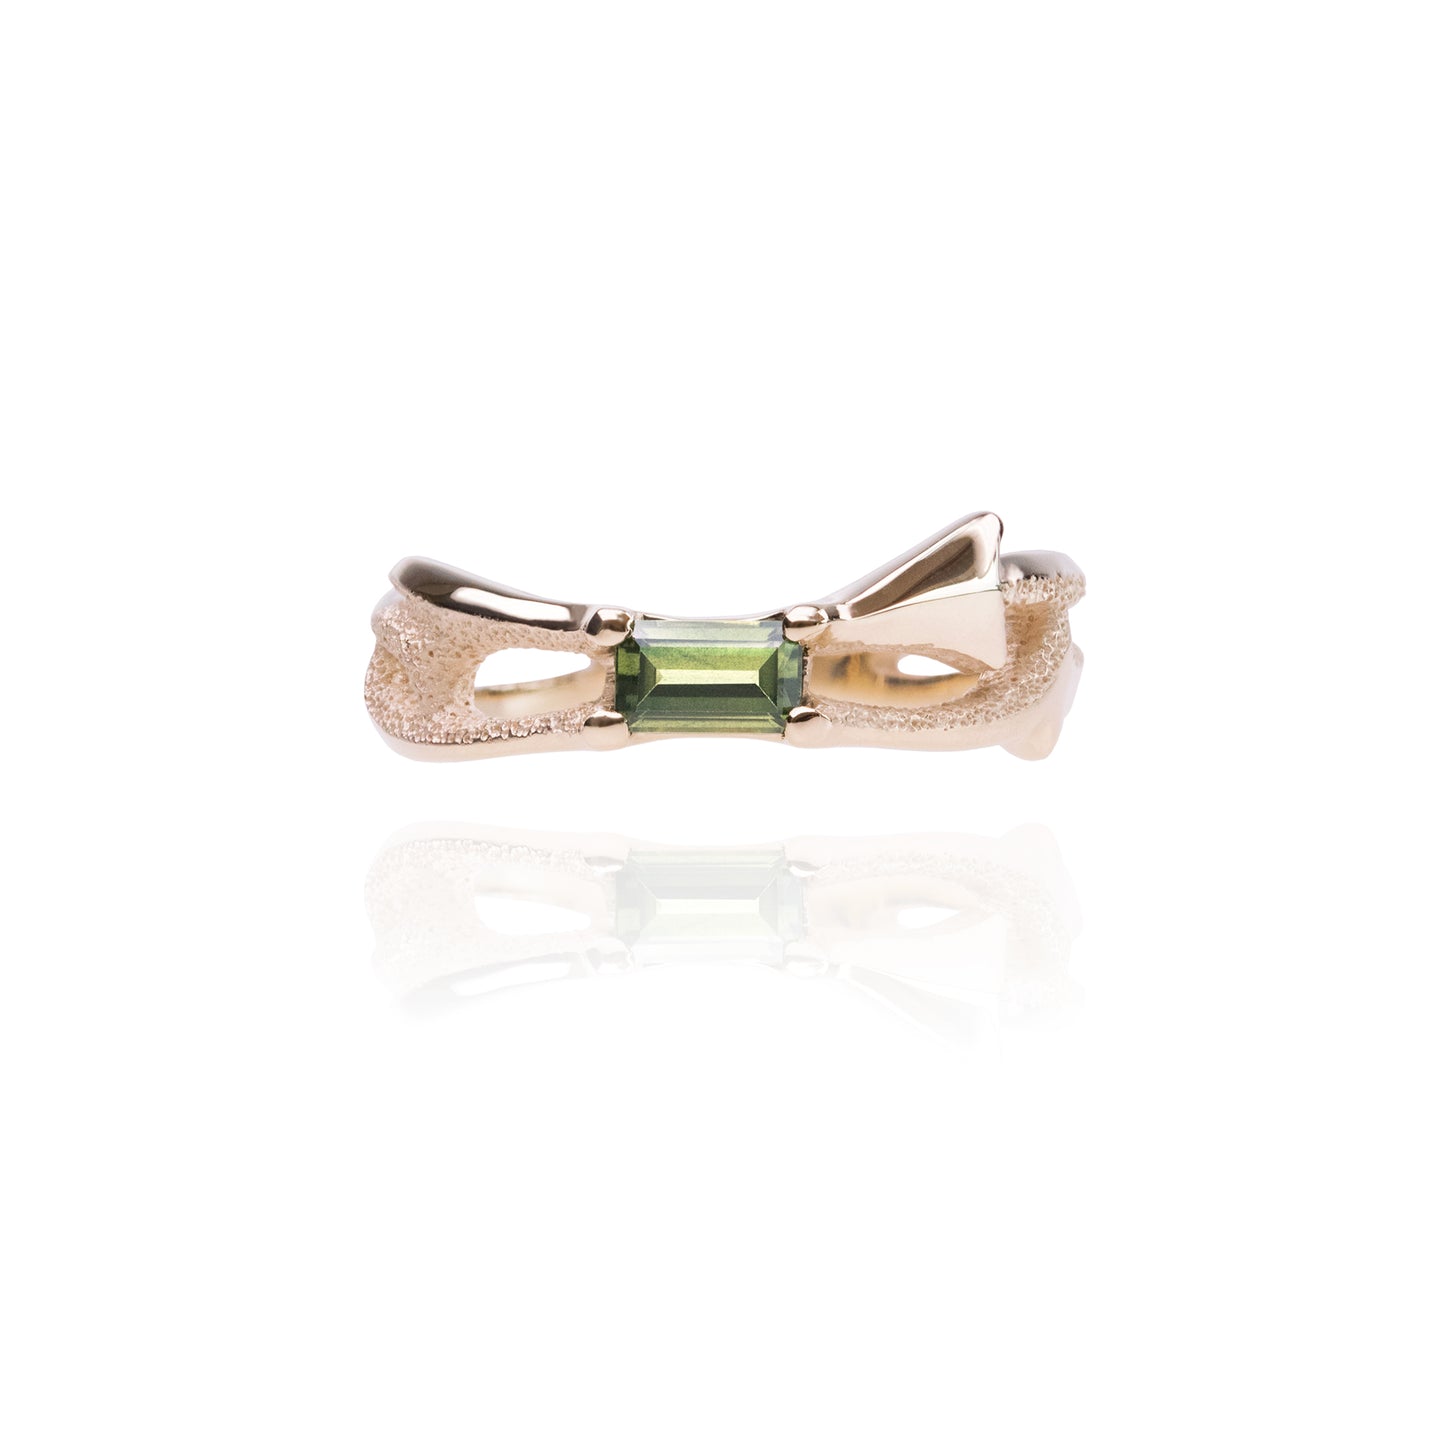 Orme-Brown Contemporary Fine Jewellery Engagement ring in sustainable recycled 9ct yellow gold with ethical baguette cut green sapphire